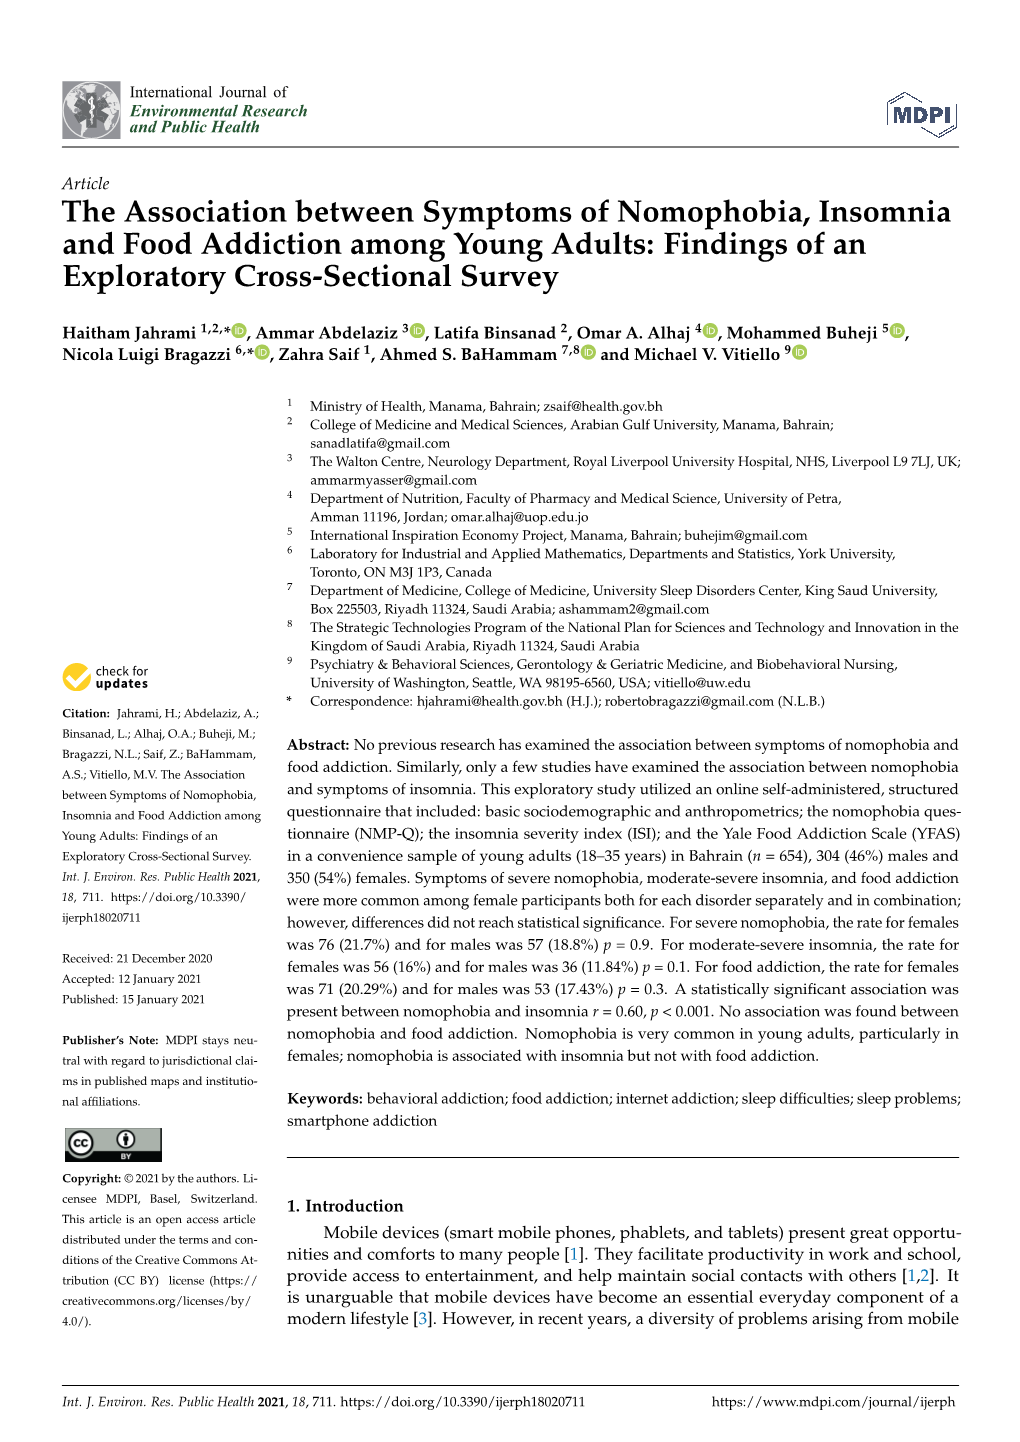 The Association Between Symptoms of Nomophobia, Insomnia and Food Addiction Among Young Adults: Findings of an Exploratory Cross-Sectional Survey